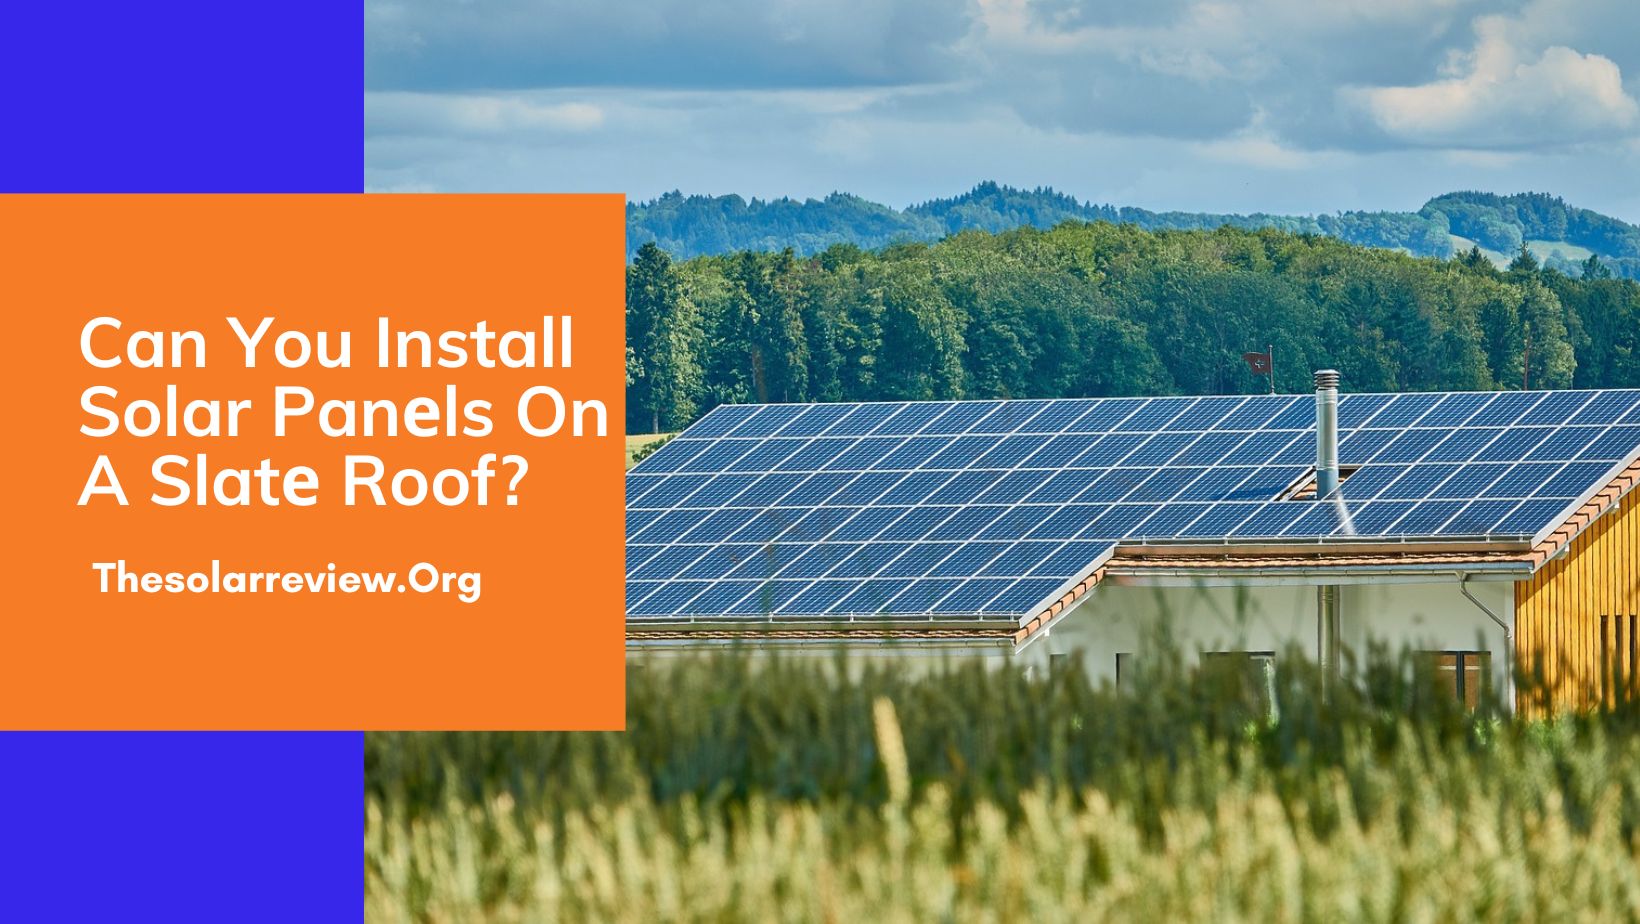 Can You Install Solar Panеls On A Slatе Roof?